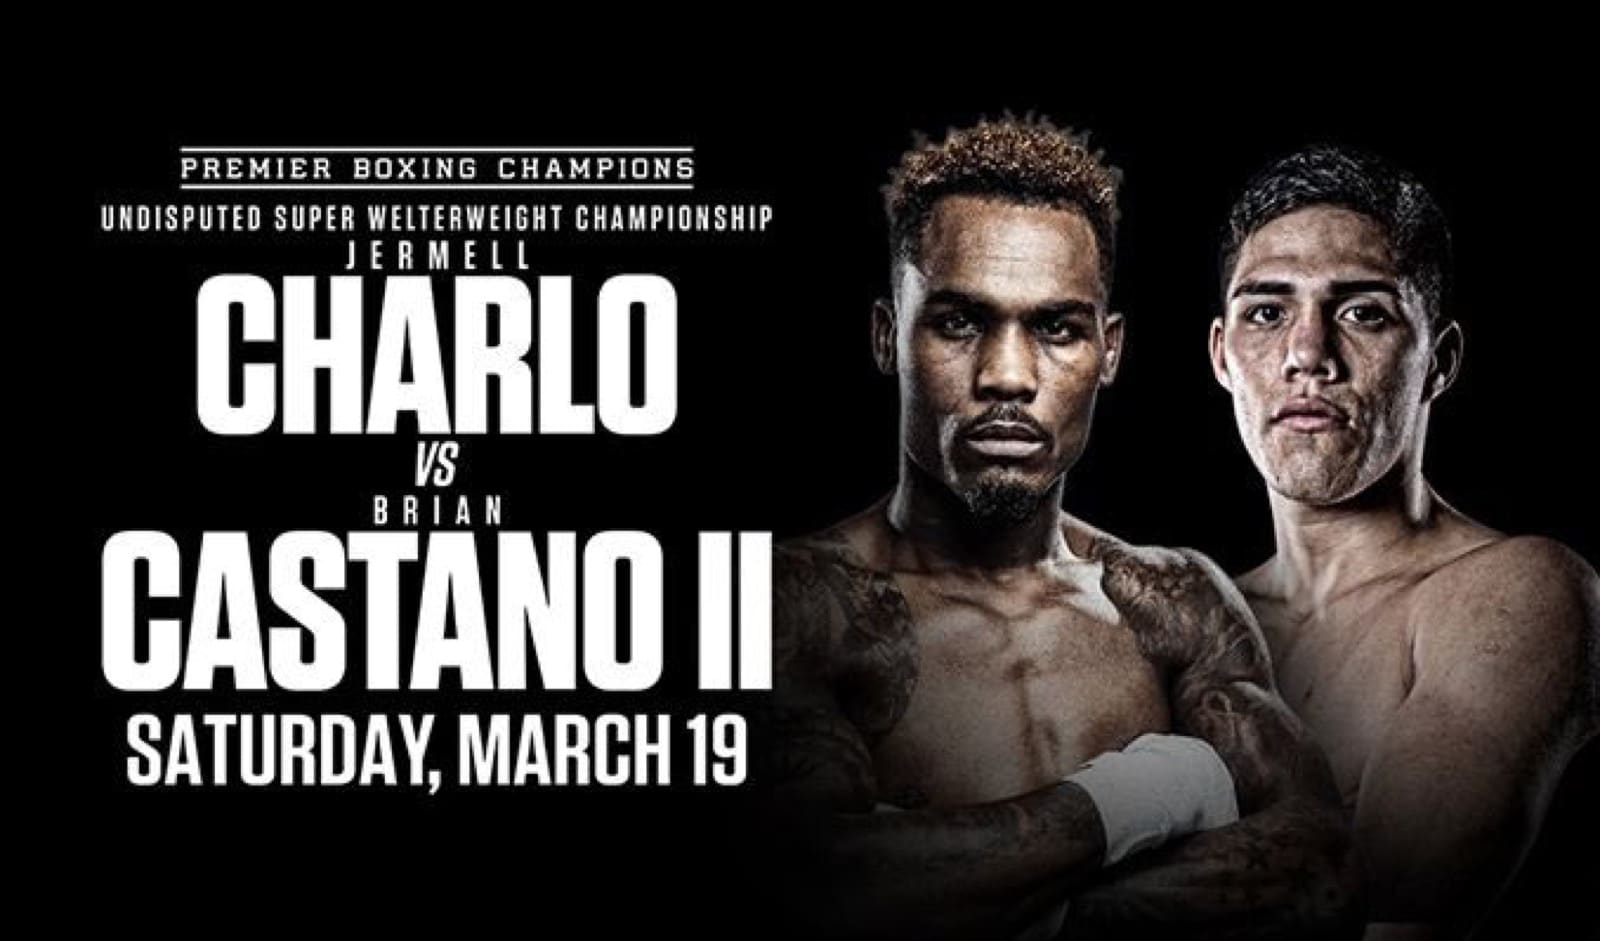 Image: Brian Castano wants to KO Jermell Charlo to guarantee win on March 19th